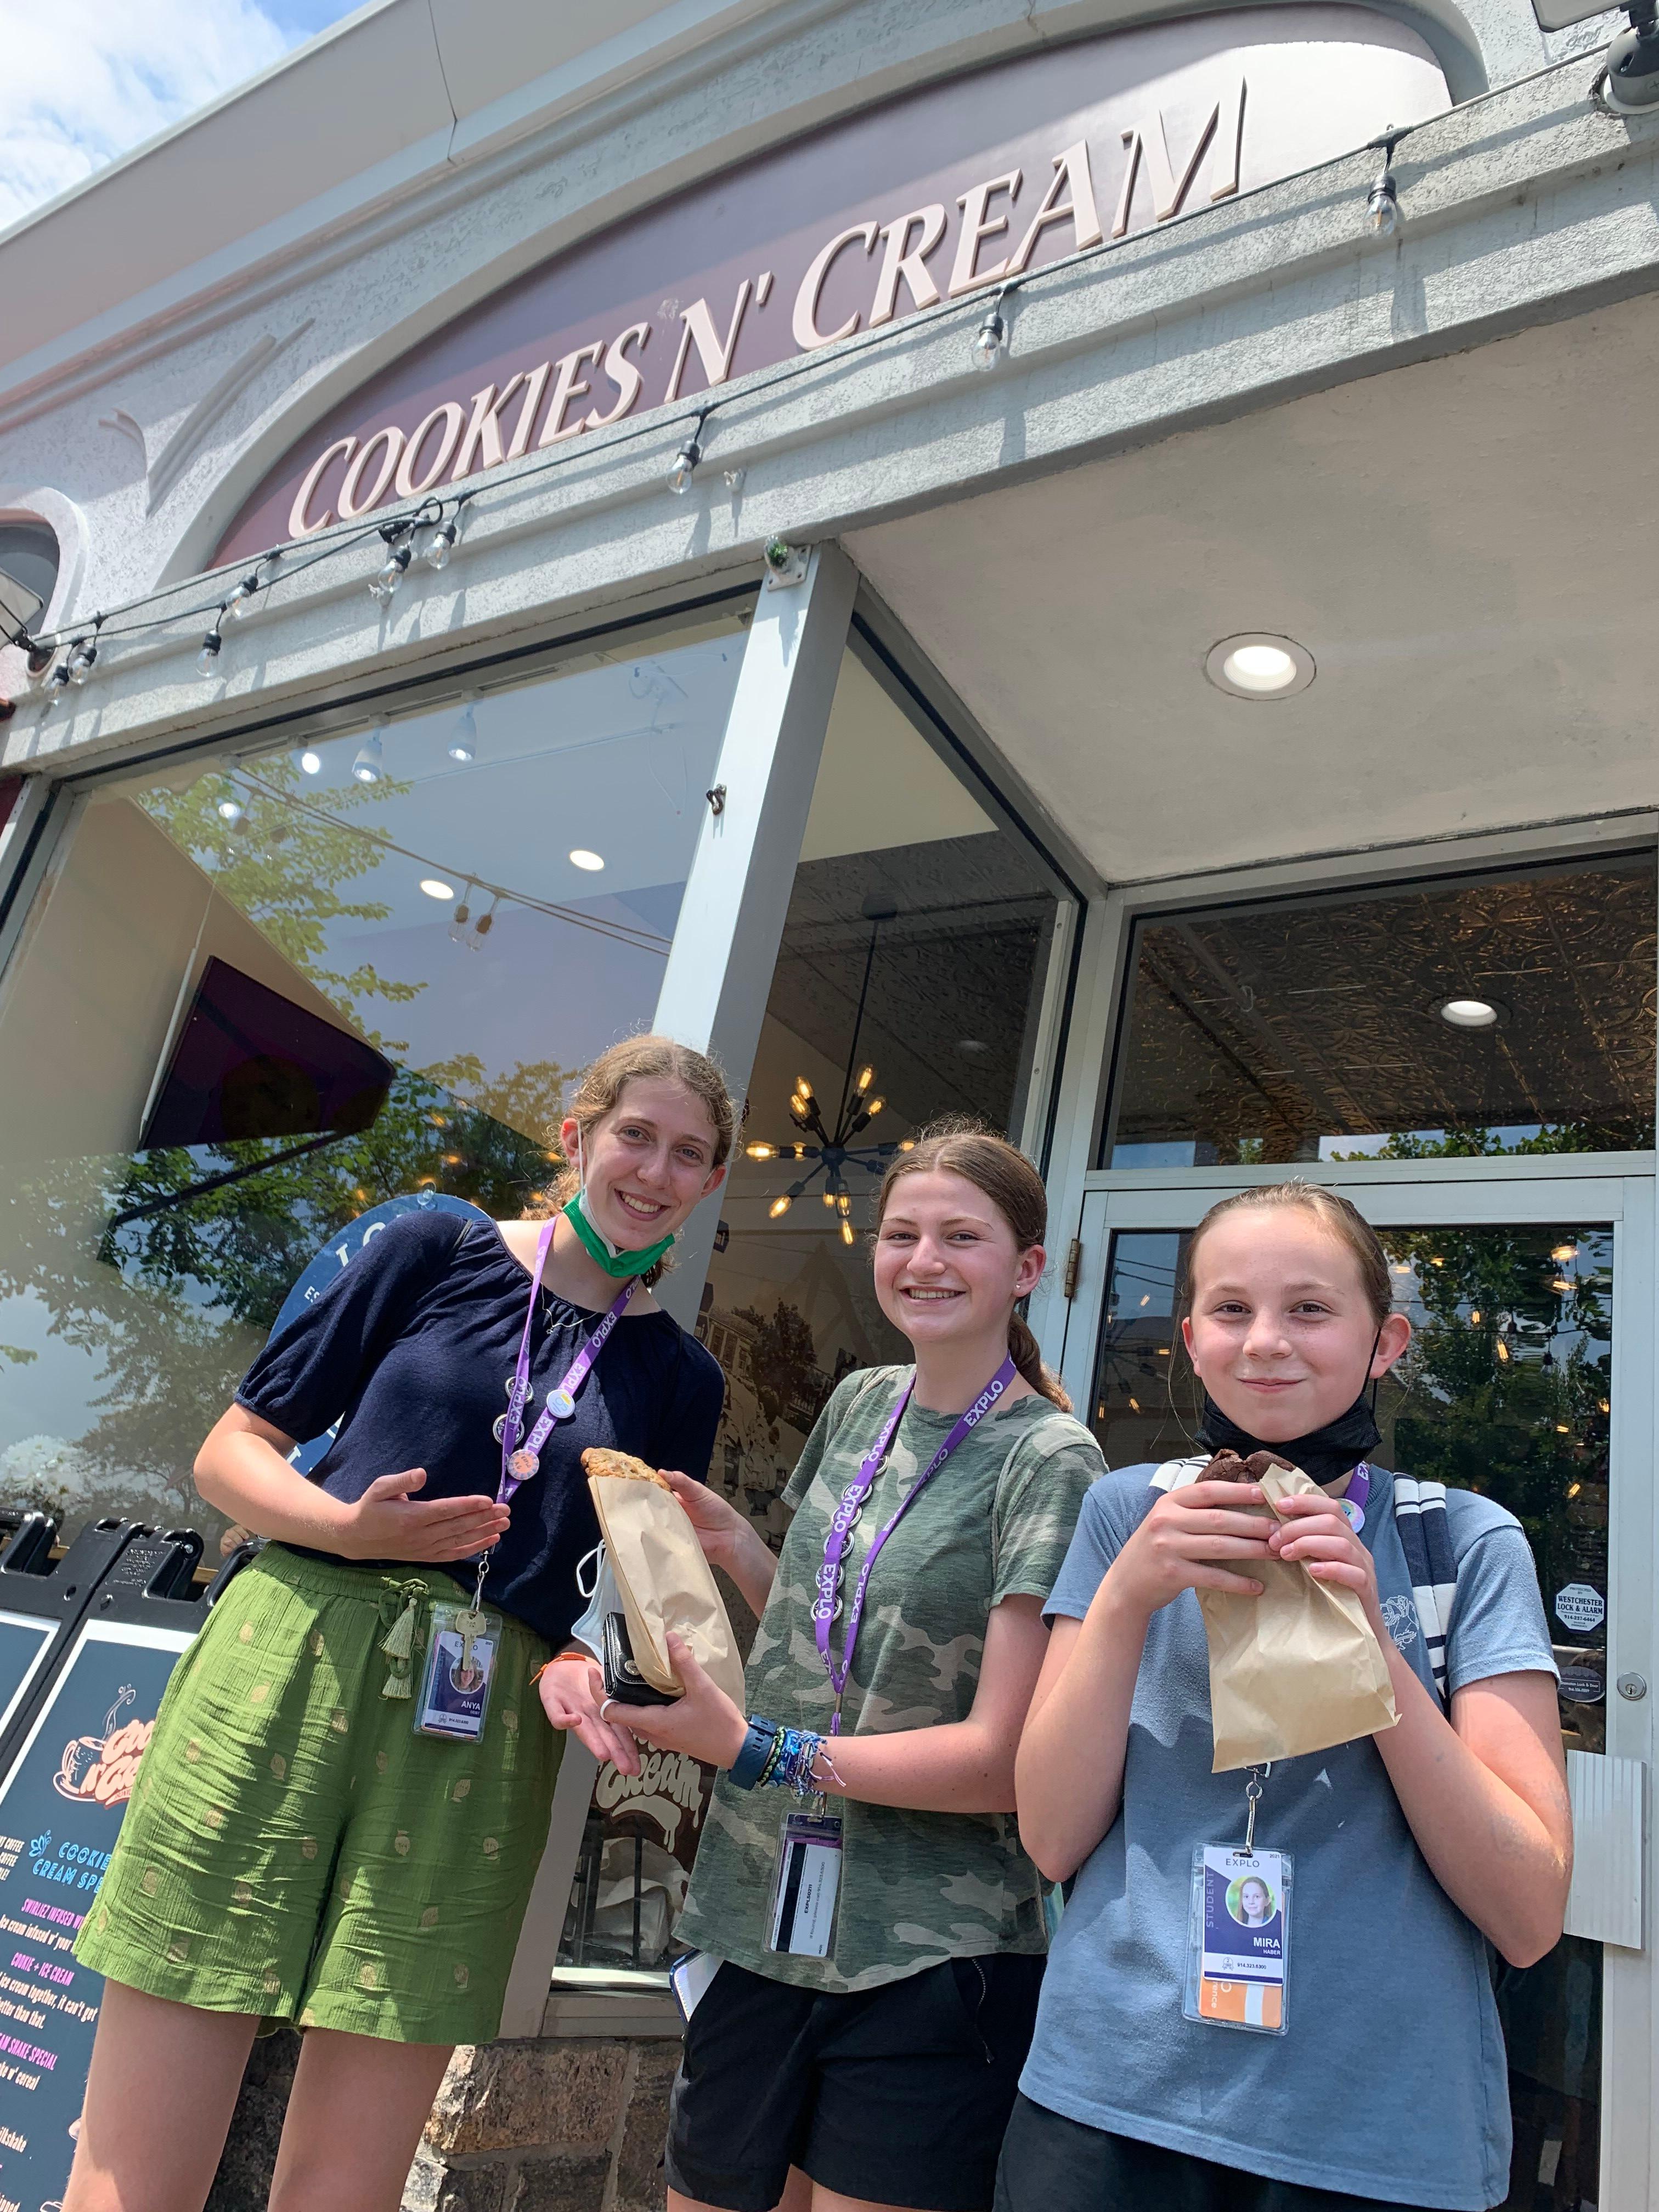 Three female EXPLO students stand side by side, treats in hand, in front of Cookies N' Cream in Bronxville, NY.